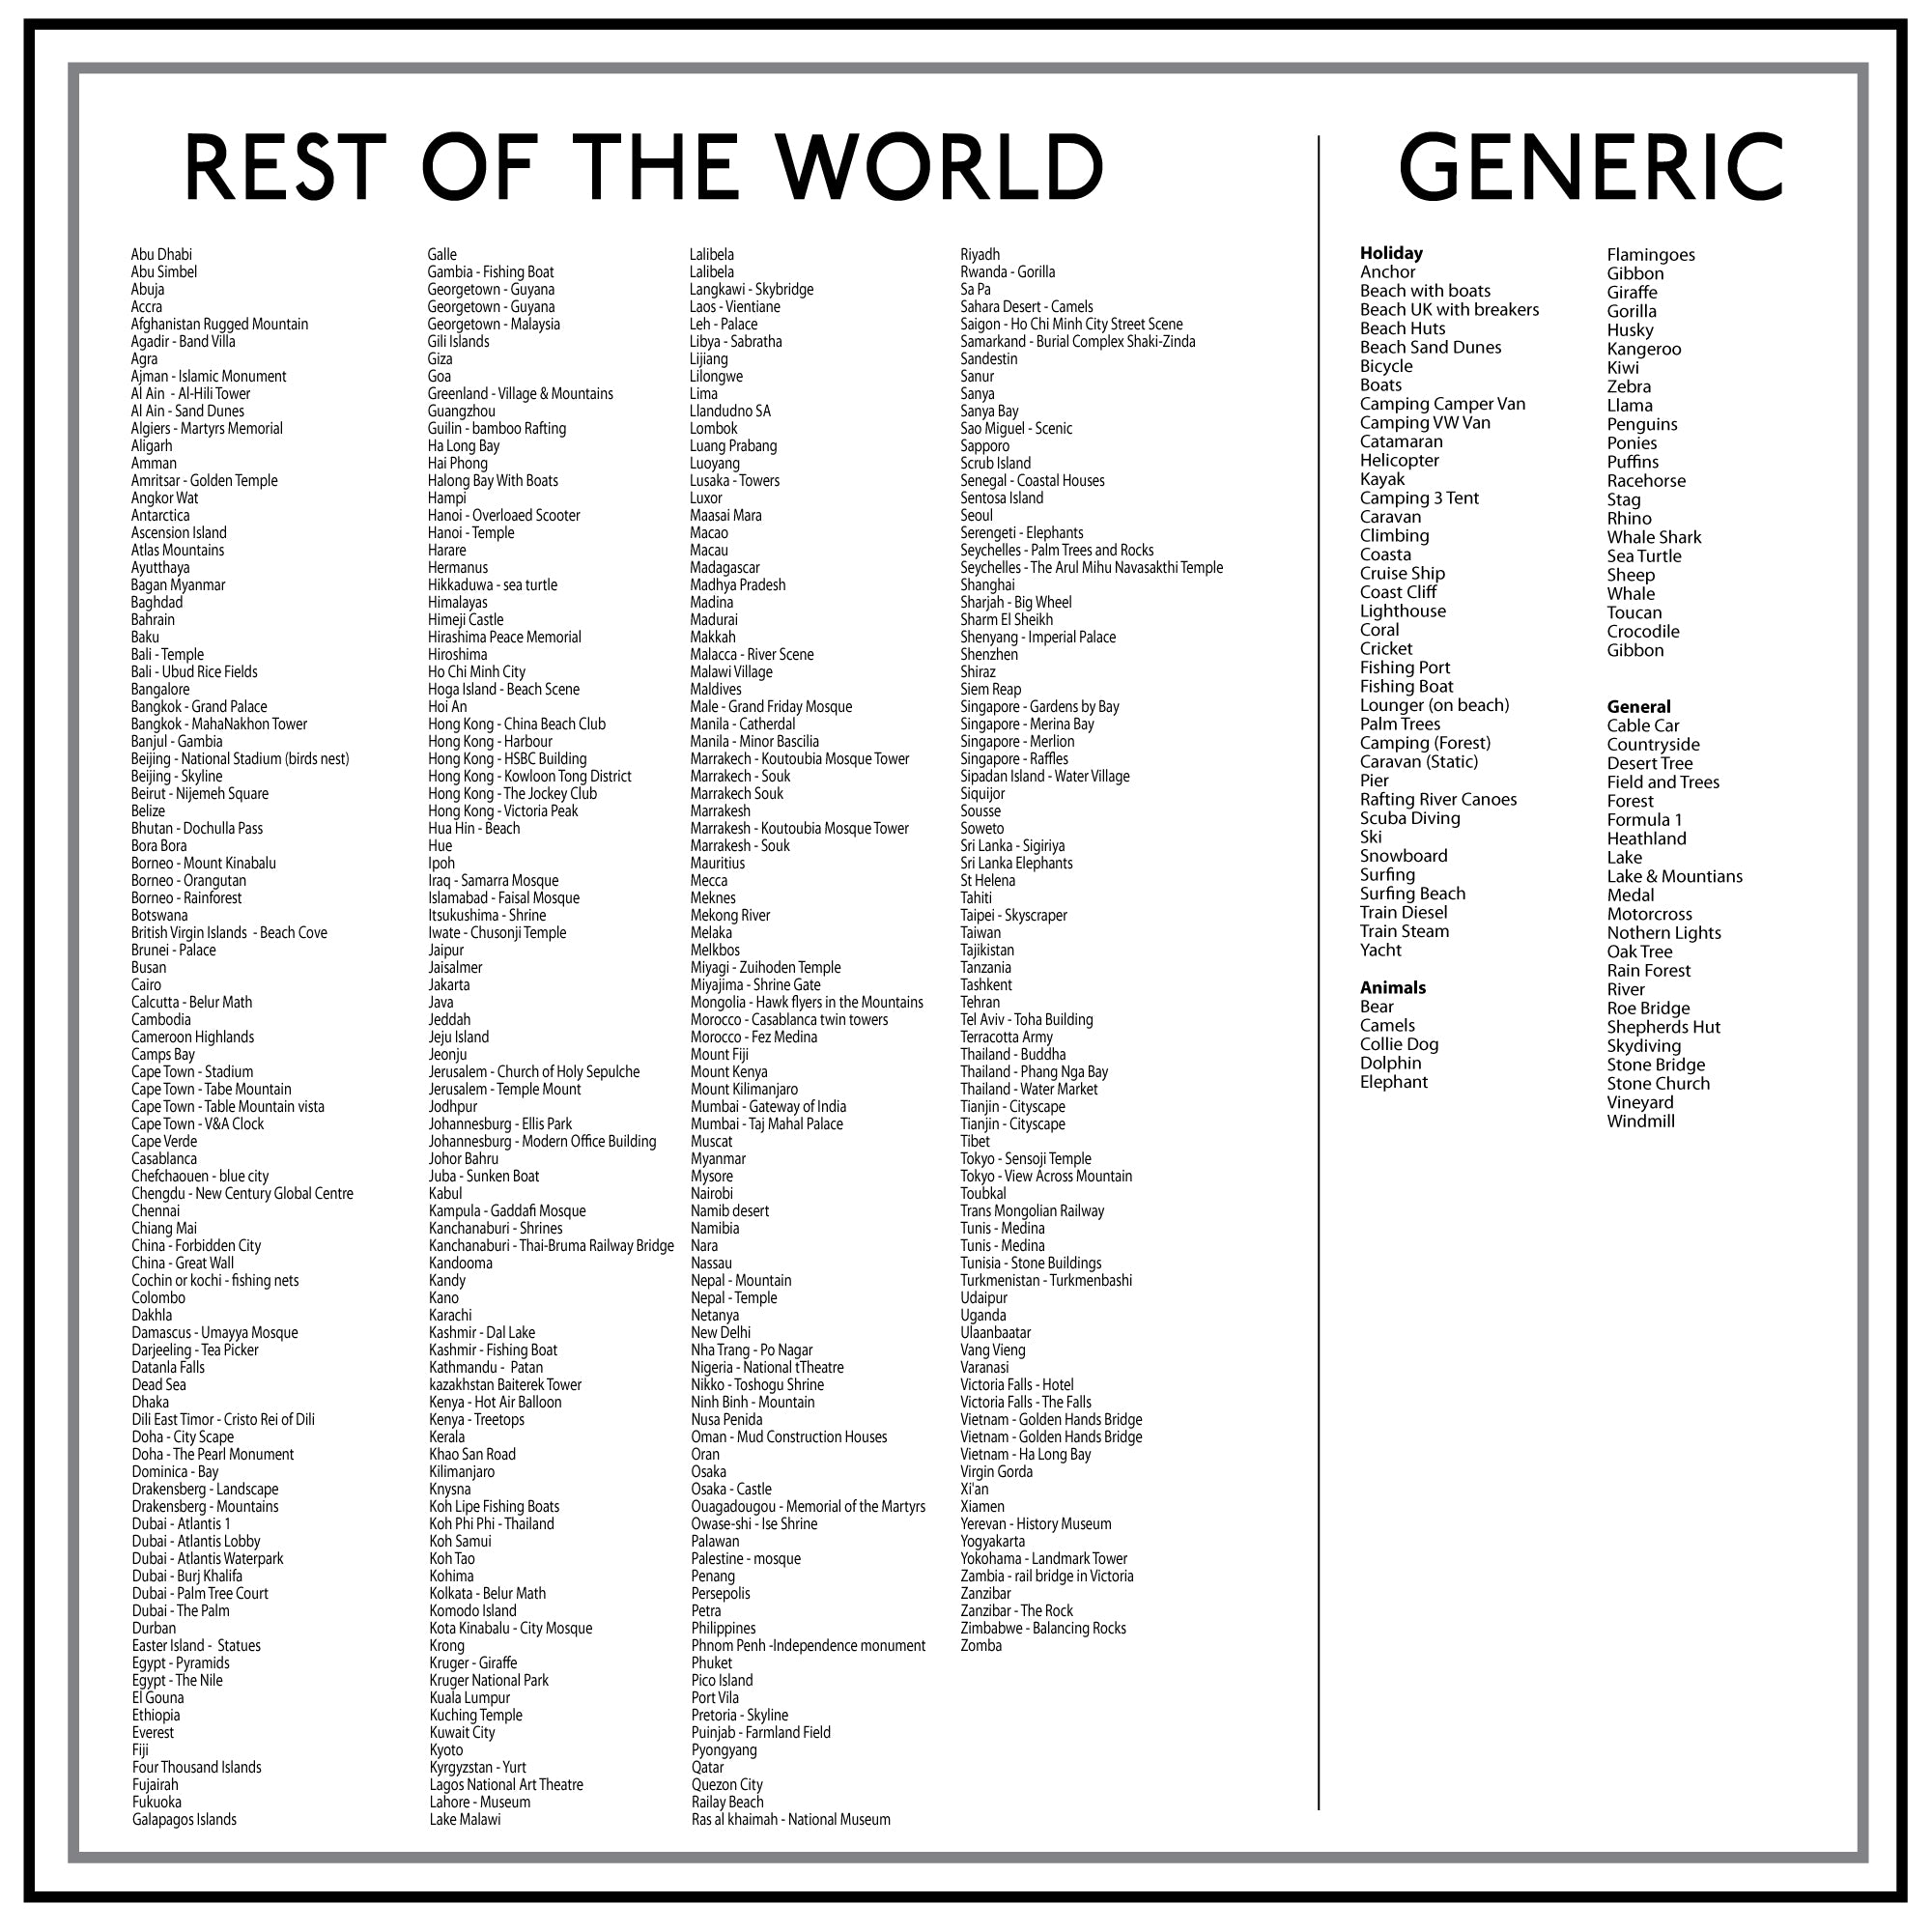 Image showing list of Rest of the World & Generic Destinations